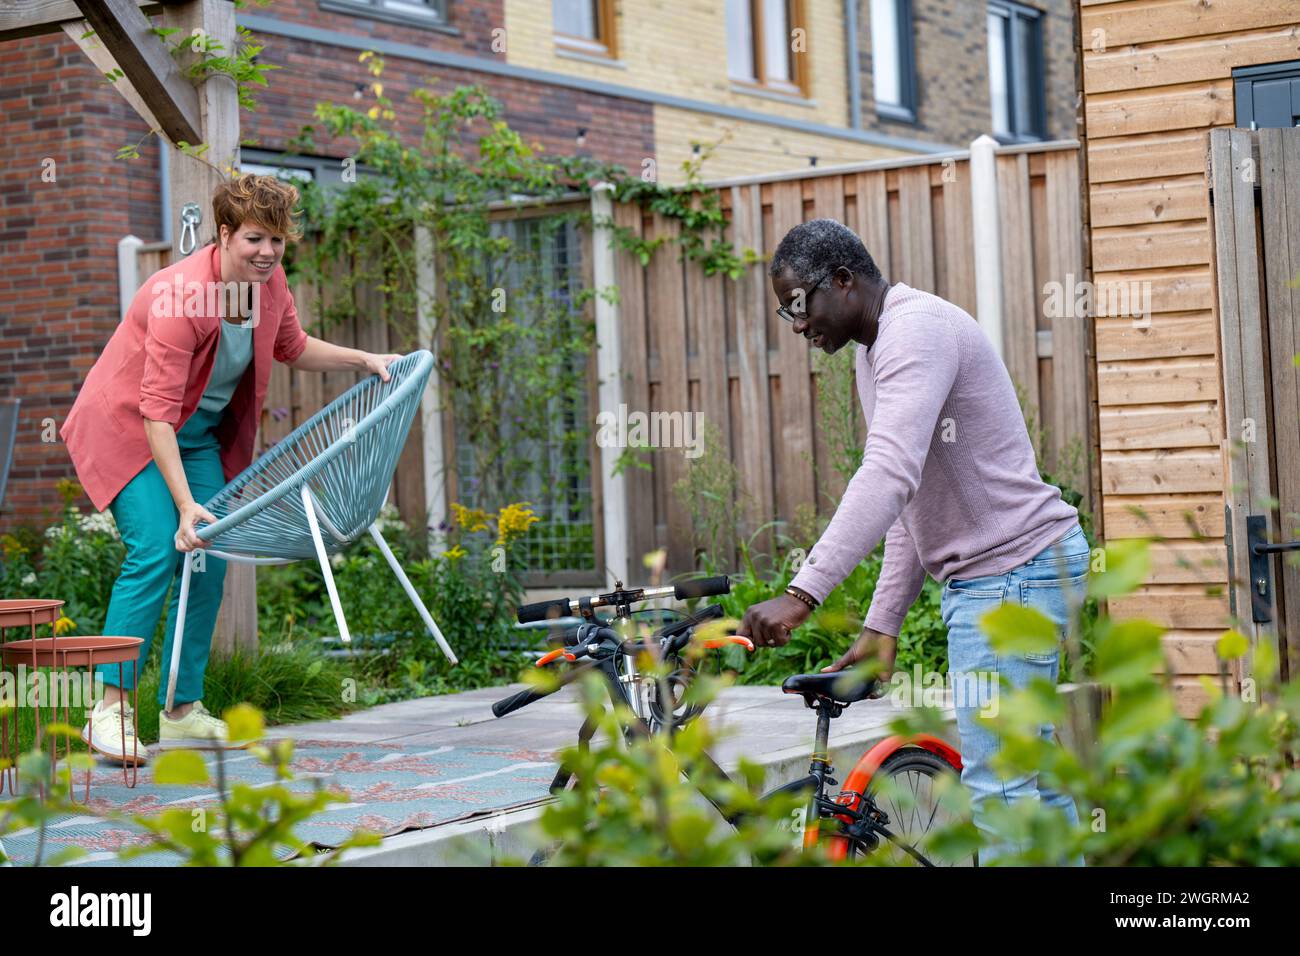 Mixed race parents cleaning the garden Stock Photo